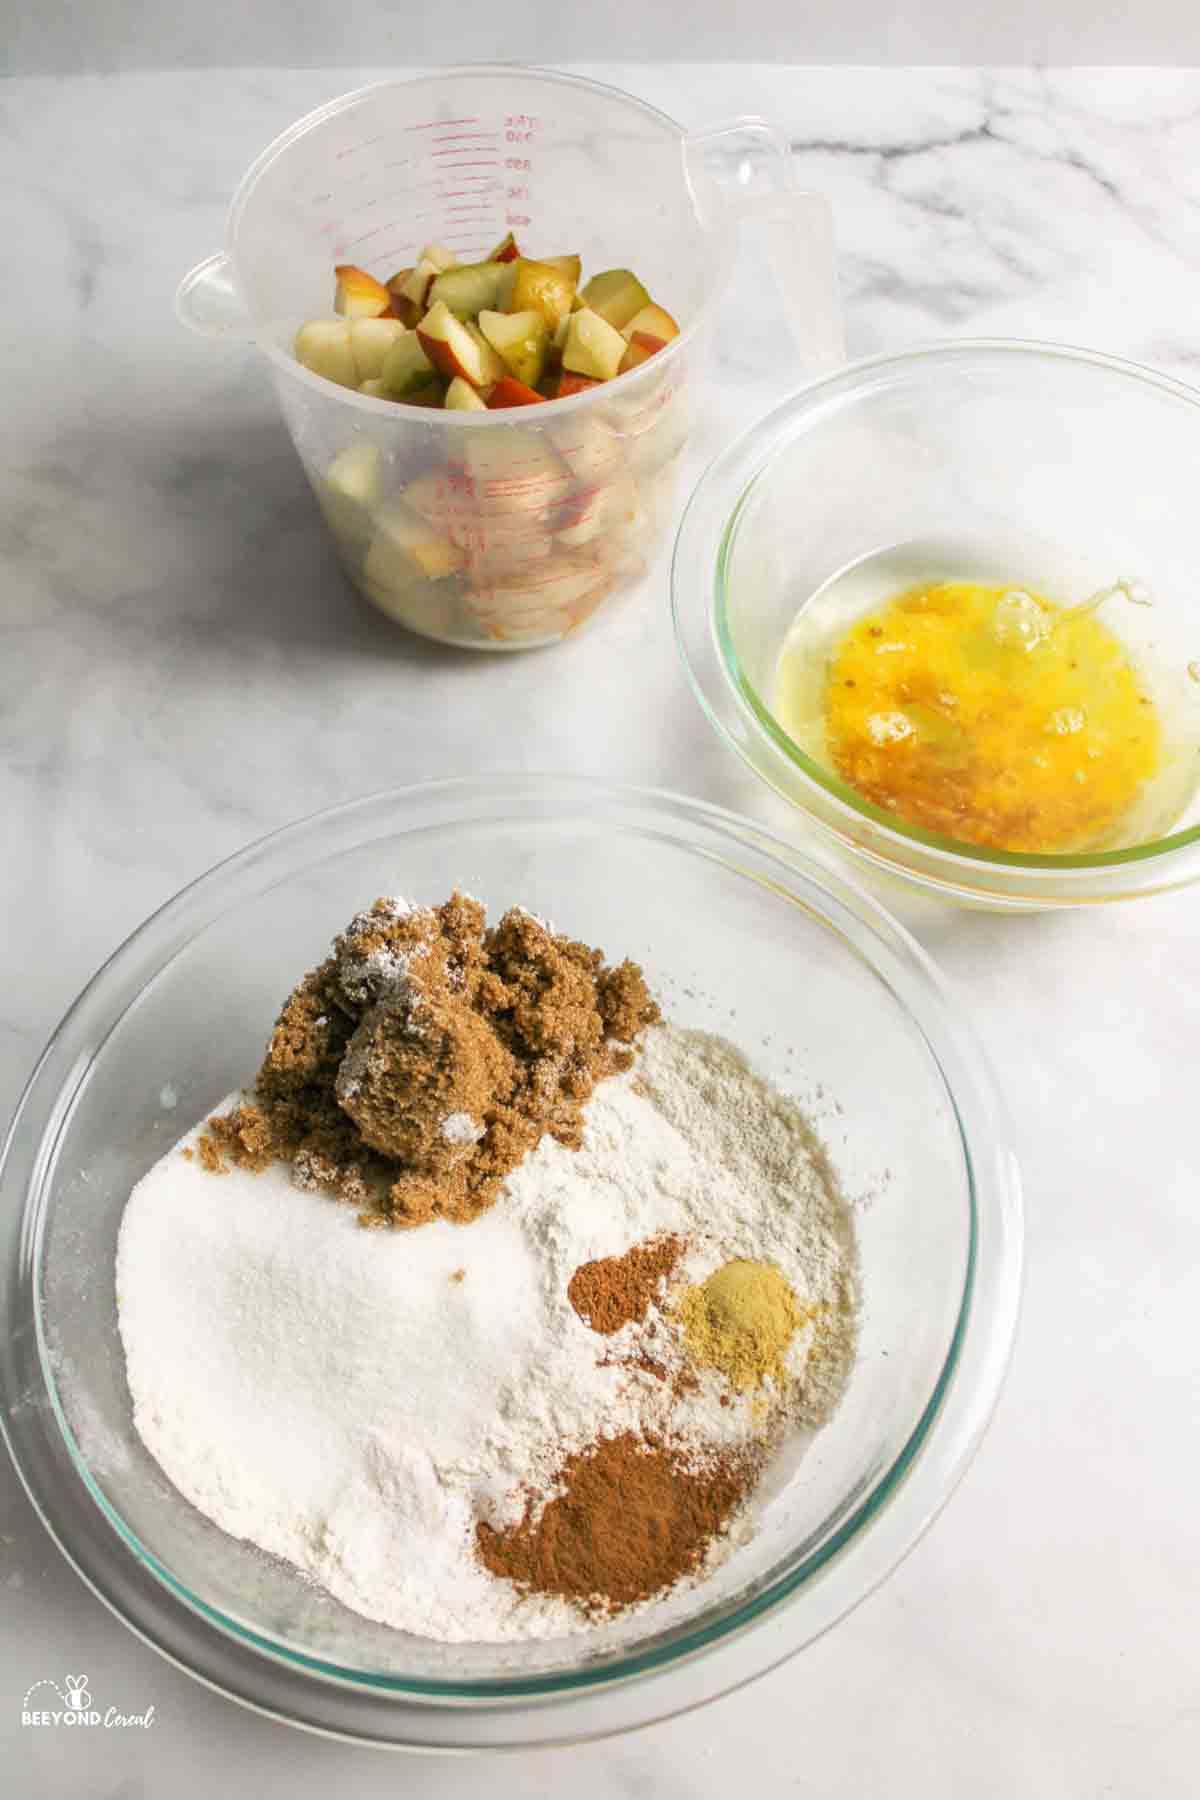 dry ingredients in one bowl, wet ingredients in another bowl and chopped pears in a third container